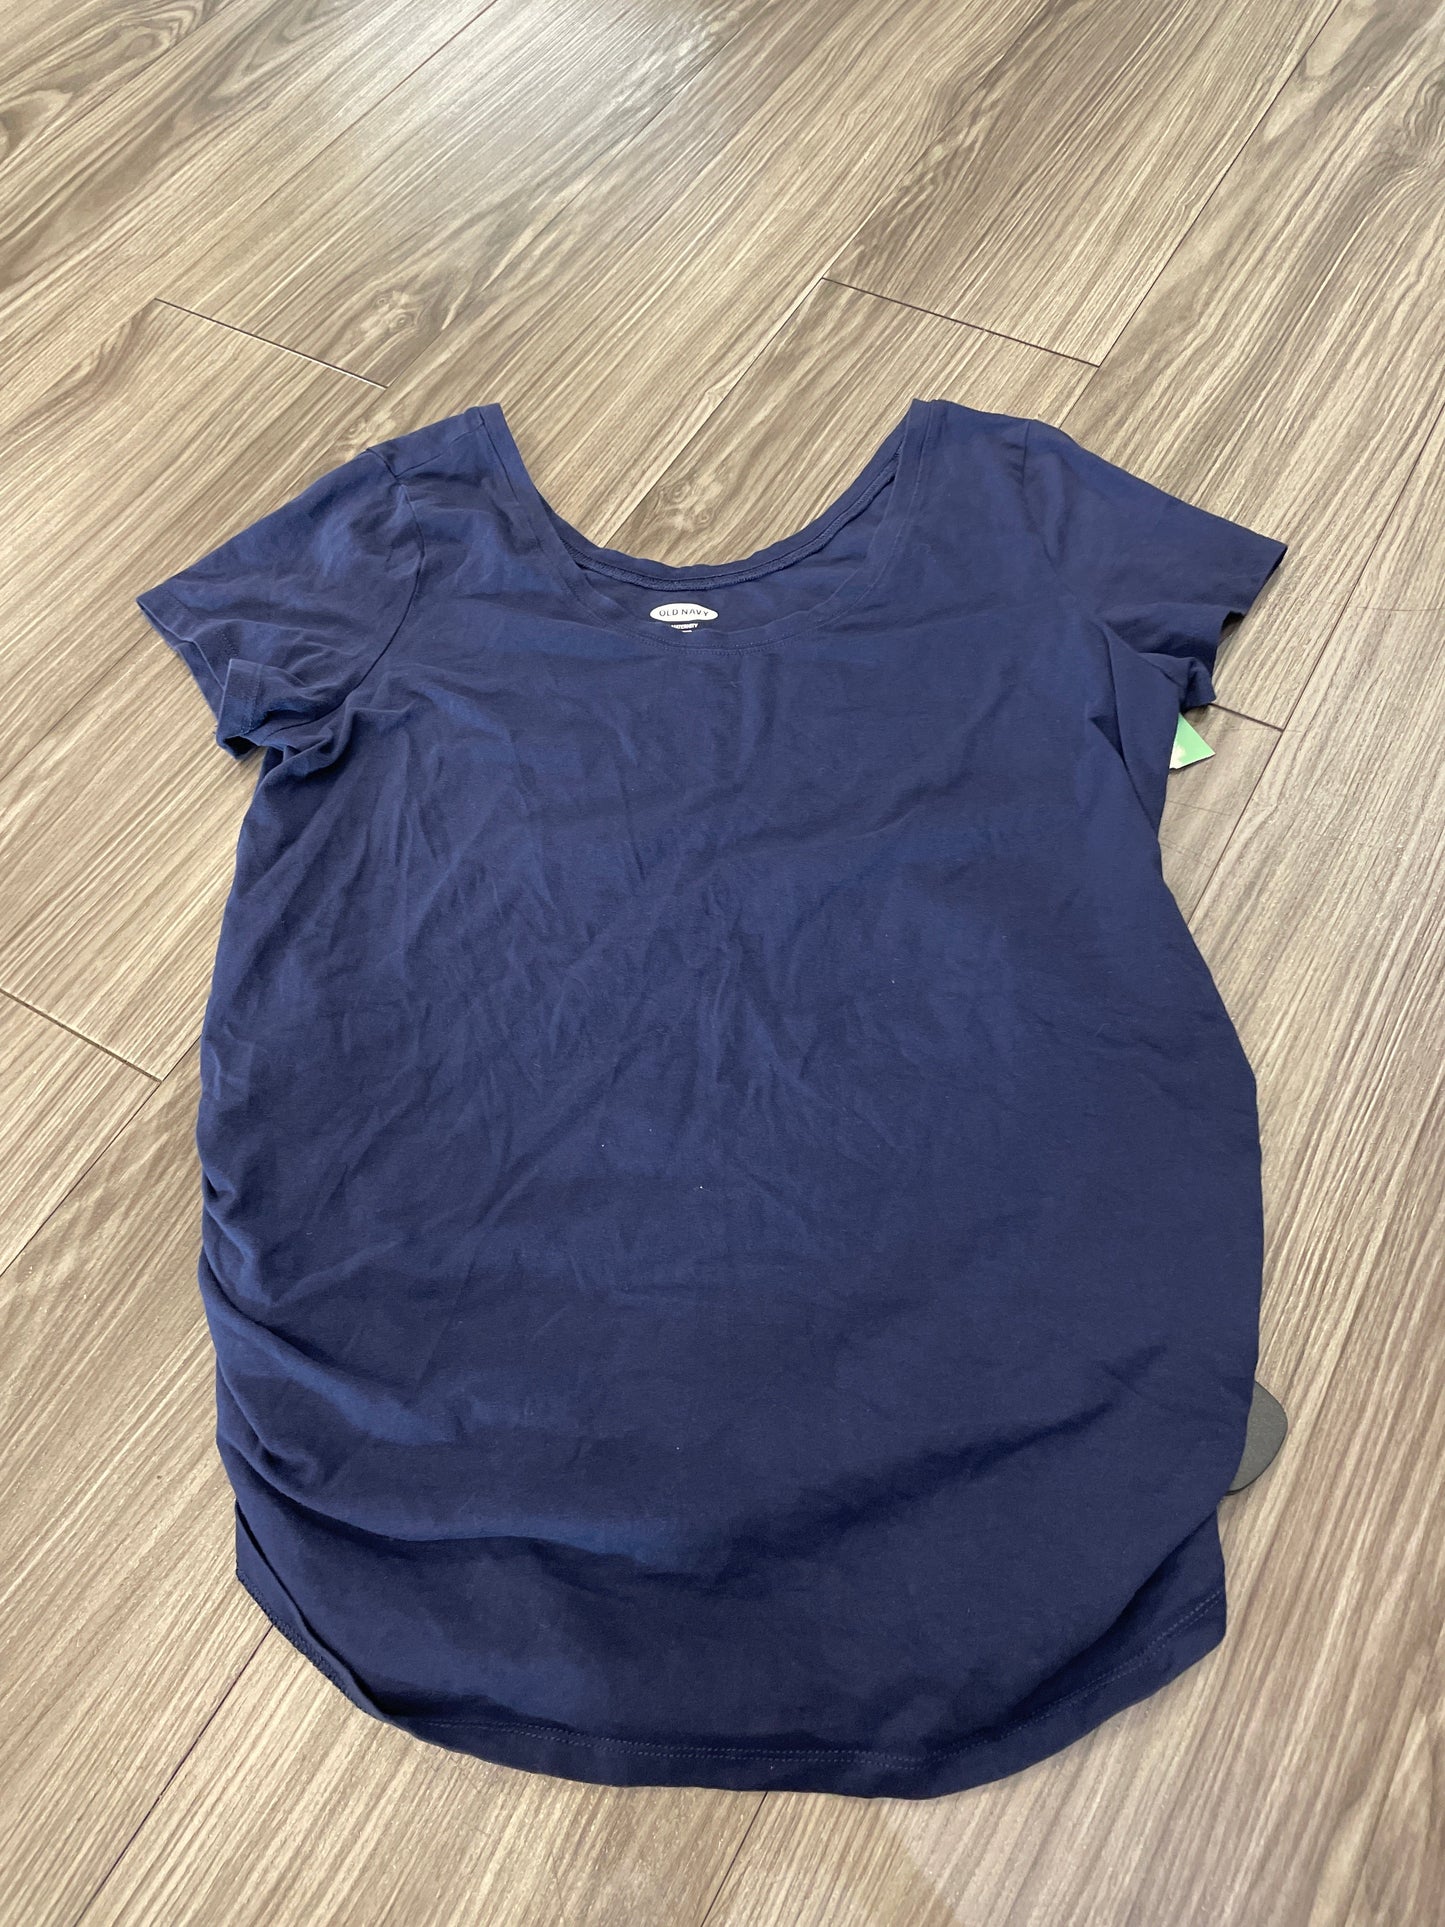 Maternity Top Short Sleeve Old Navy, Size L